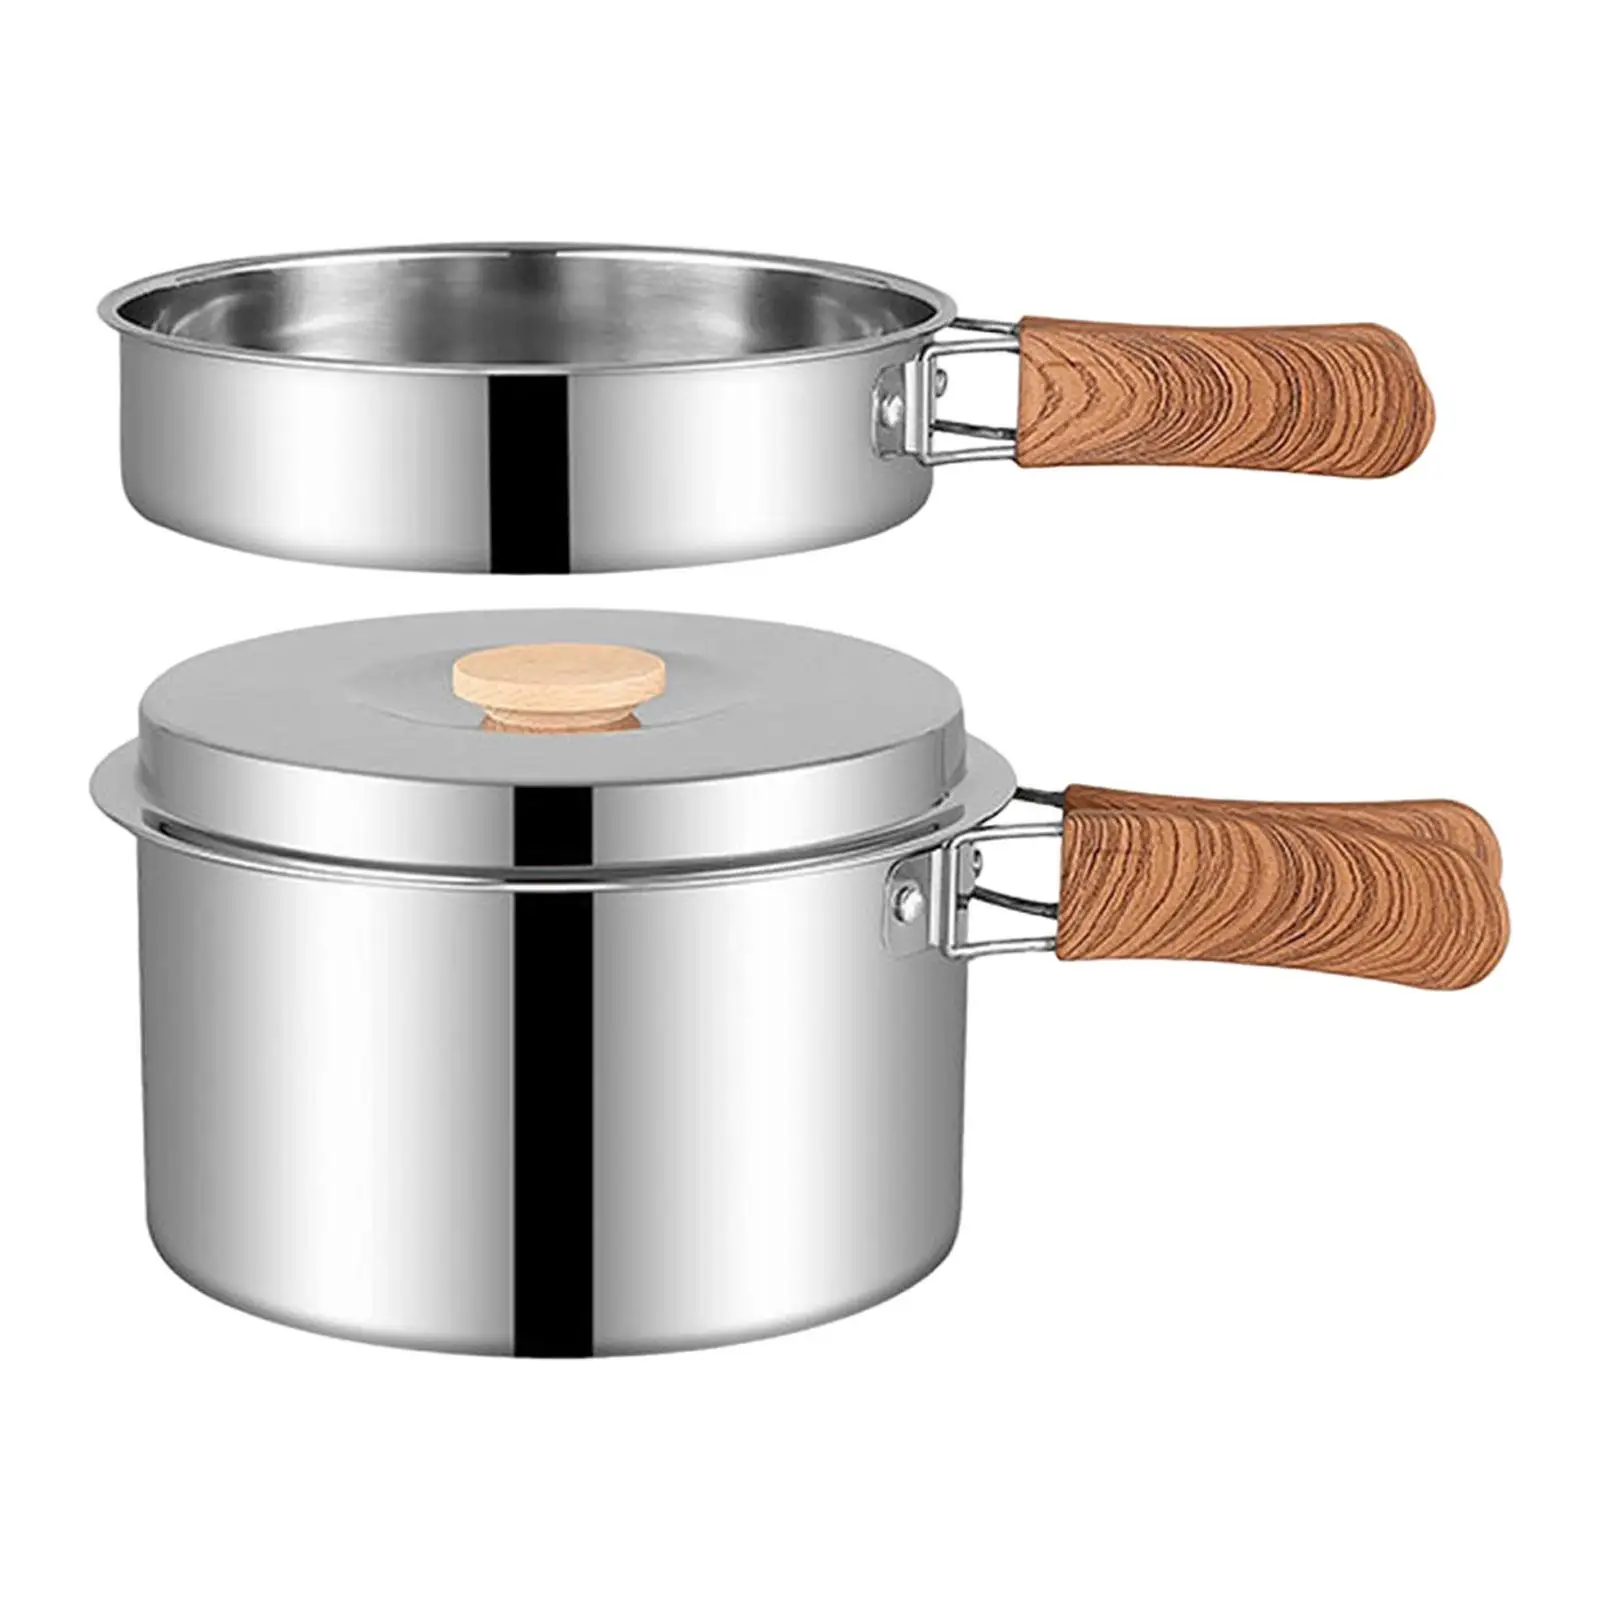 Camping Pot Campfire Kettle Multifunctional Pot with Foldable Handle Cookware